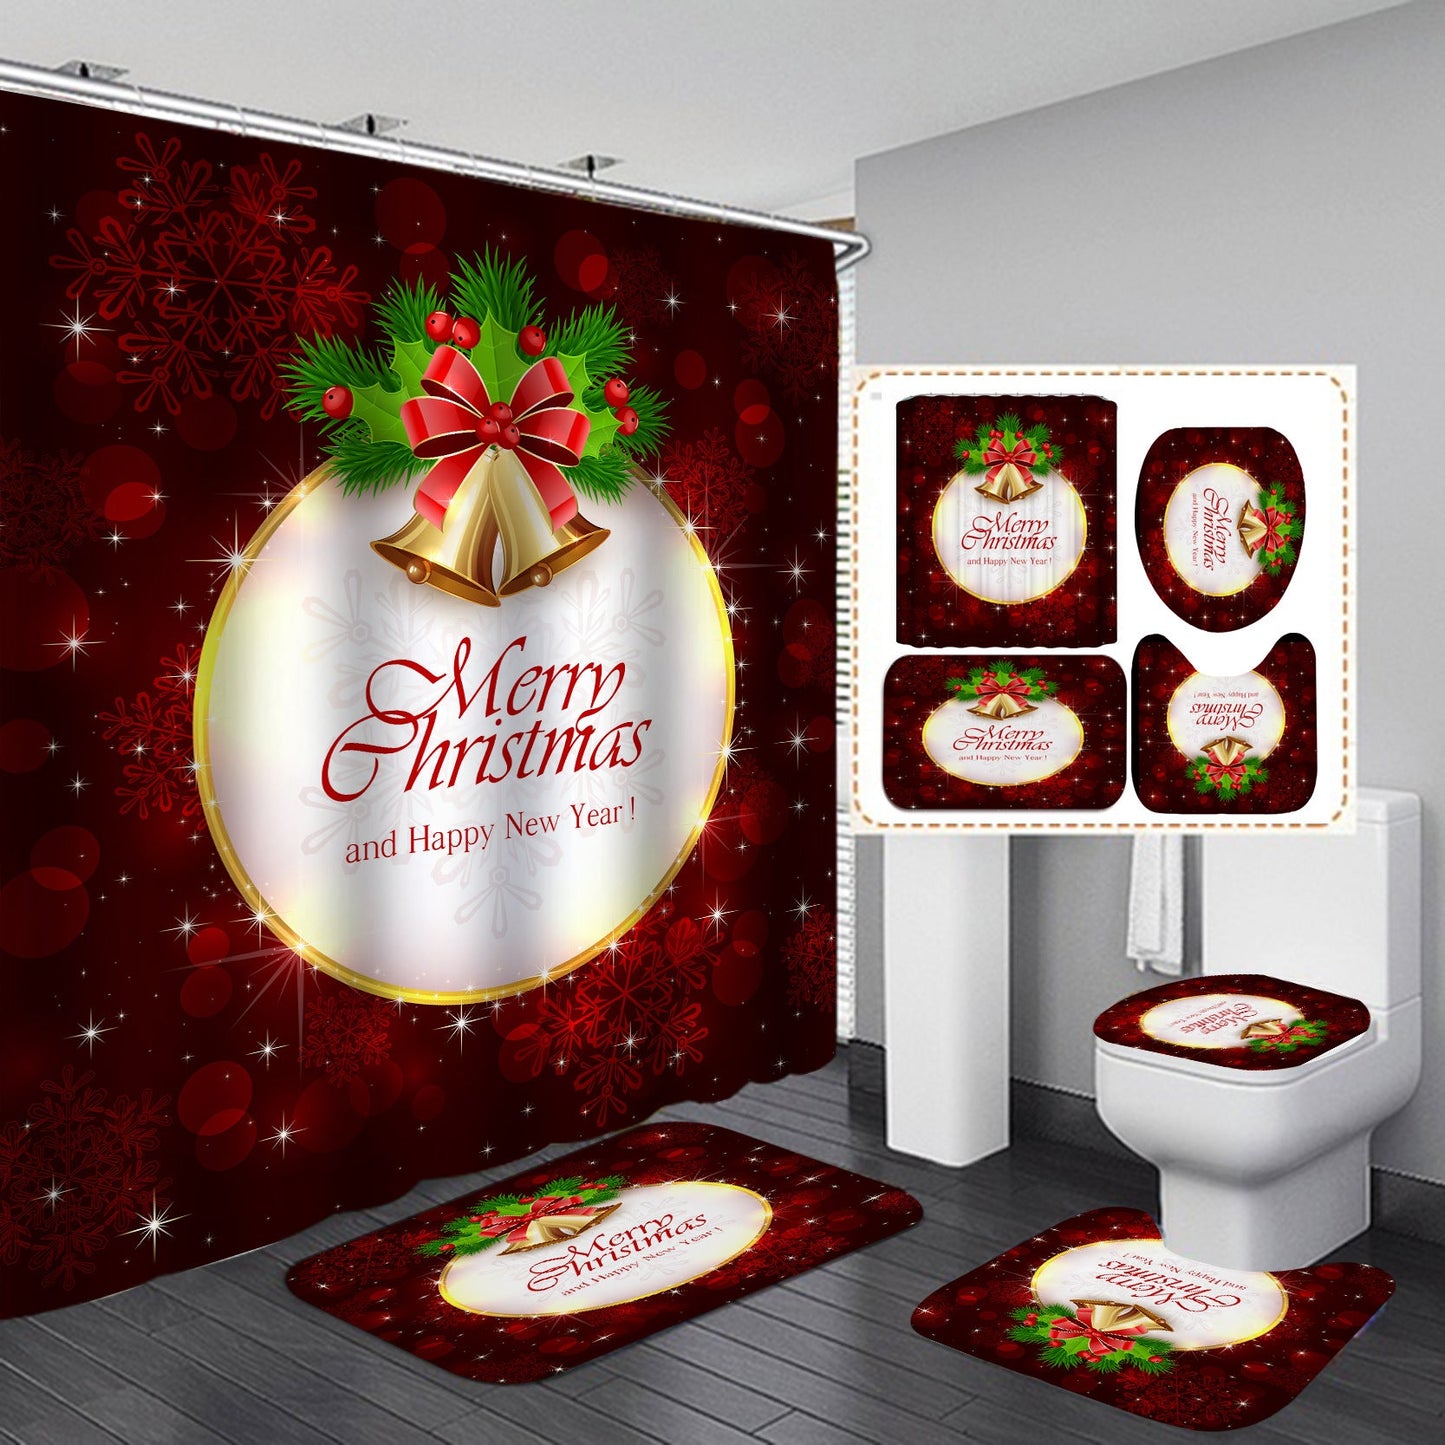 Merry Christmas Santa Claus Shower Curtain Bathroom SetsNon-Slip Toilet Lid Cover-Shower Curtain-180×180cm Shower Curtain Only-3-Free Shipping at meselling99